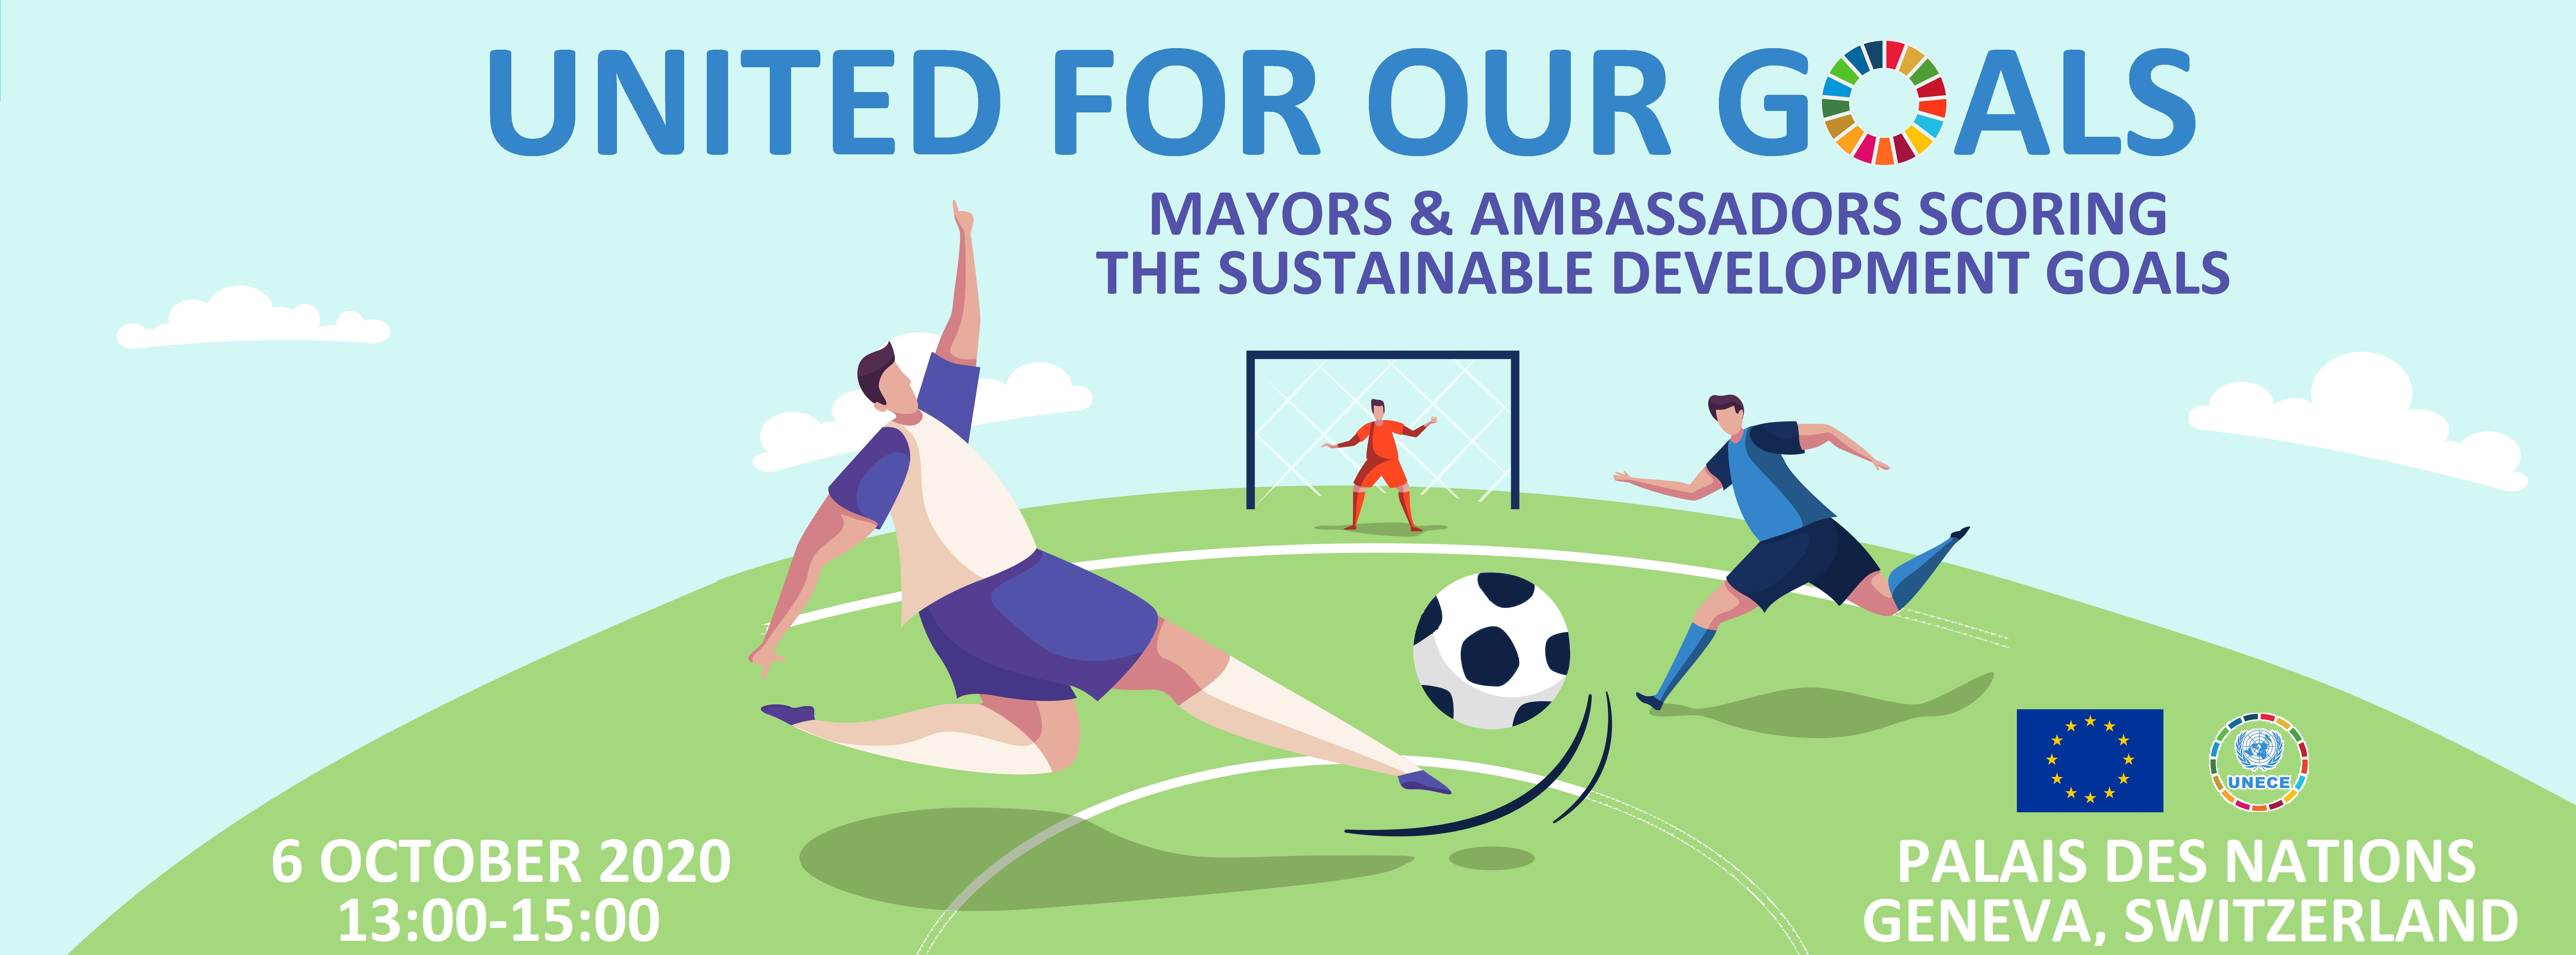 Soccer match "United for our Goals" | Forum of Mayors 2020 